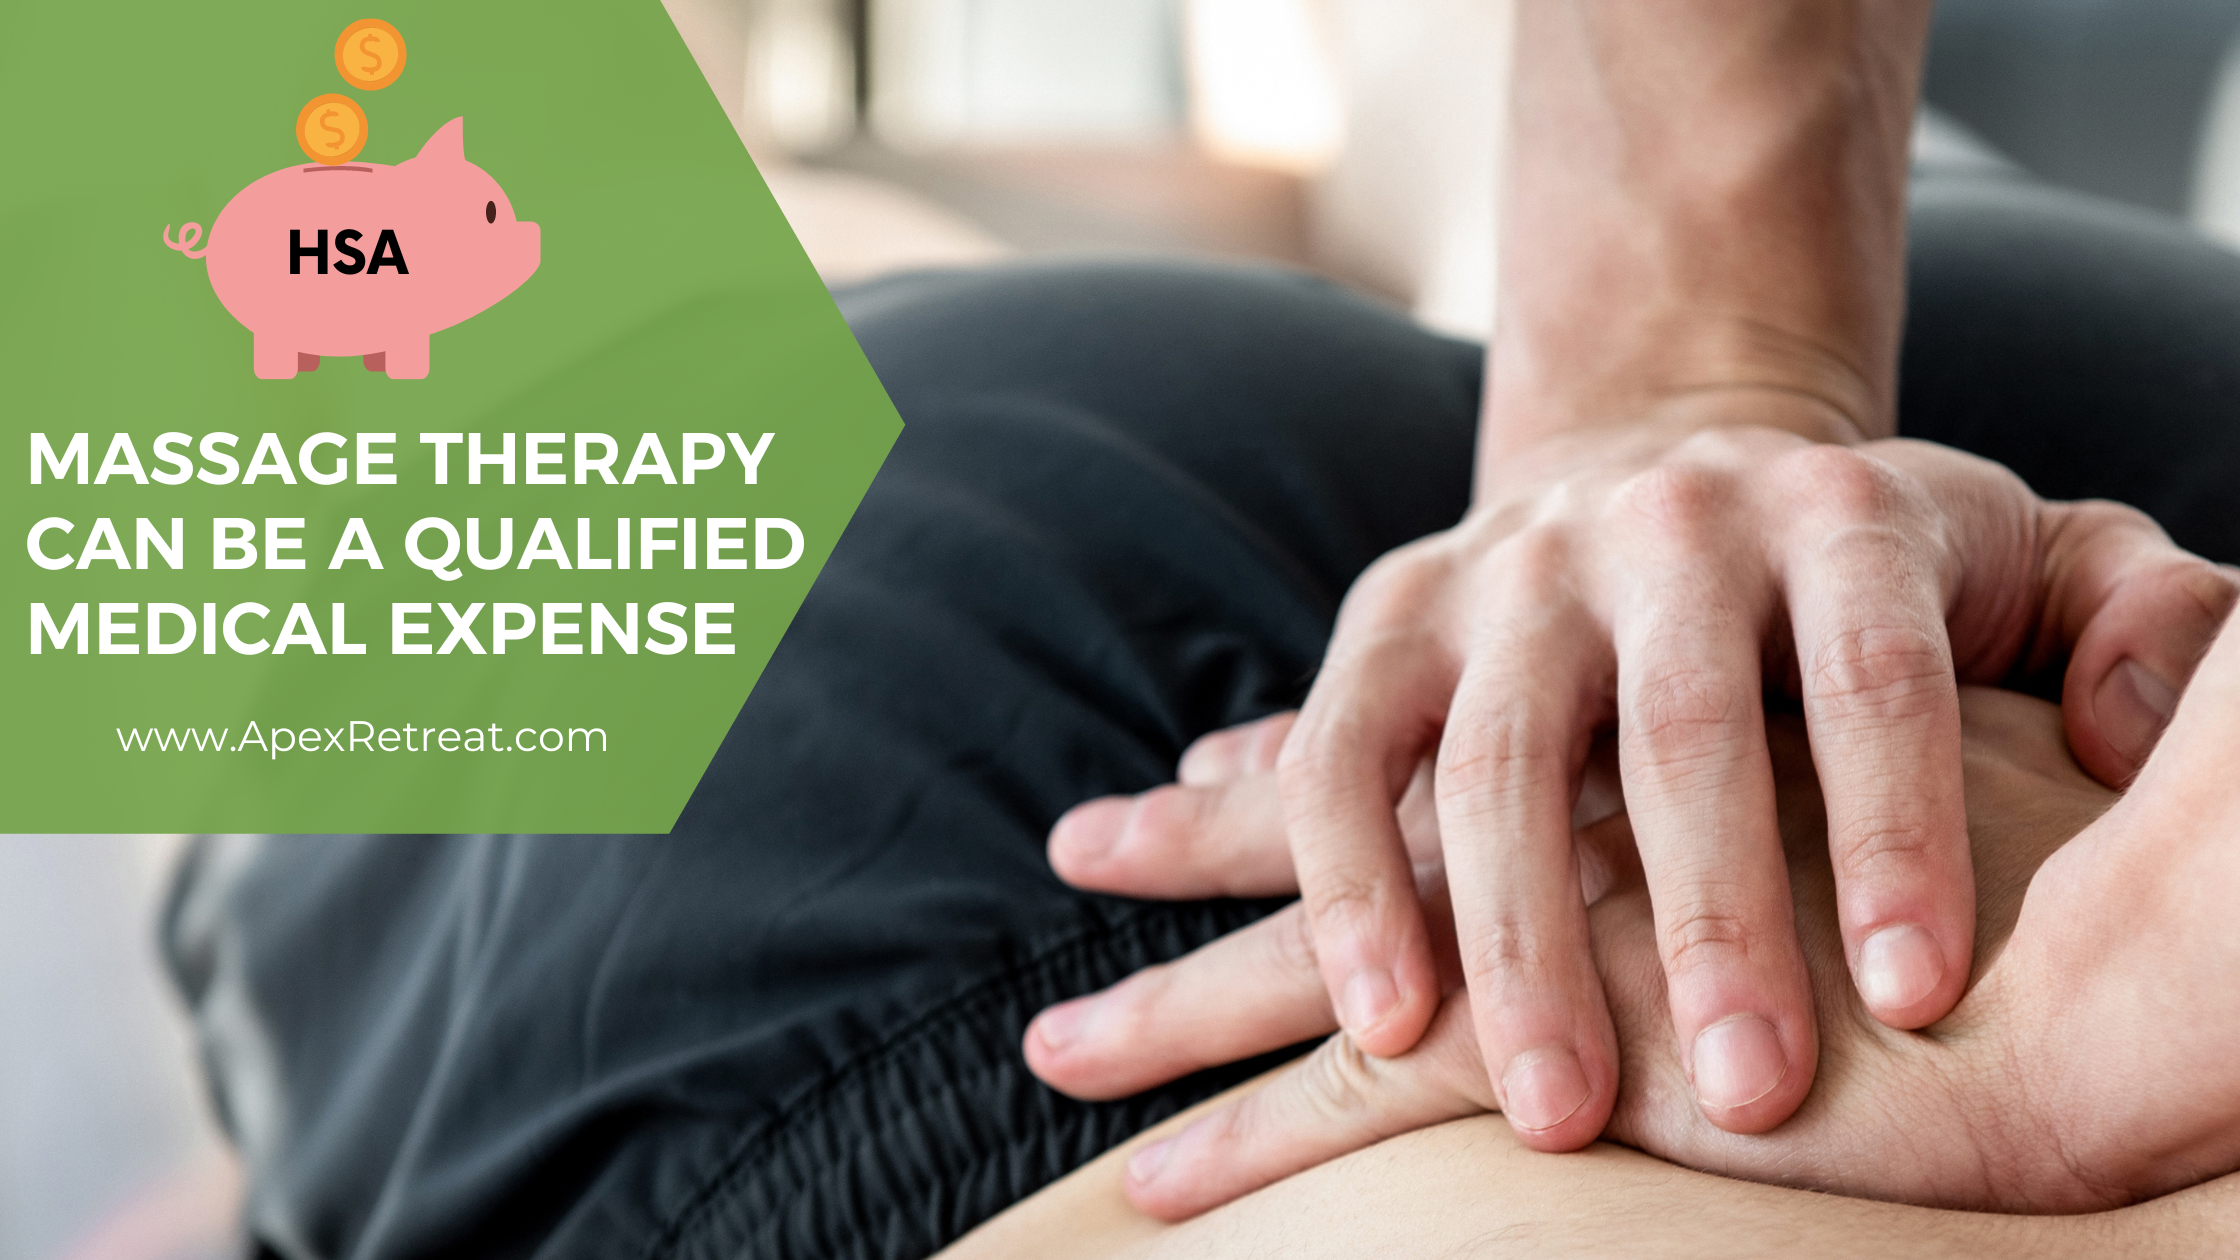 Can I Use an HSA Card for Massages? - Best Spa